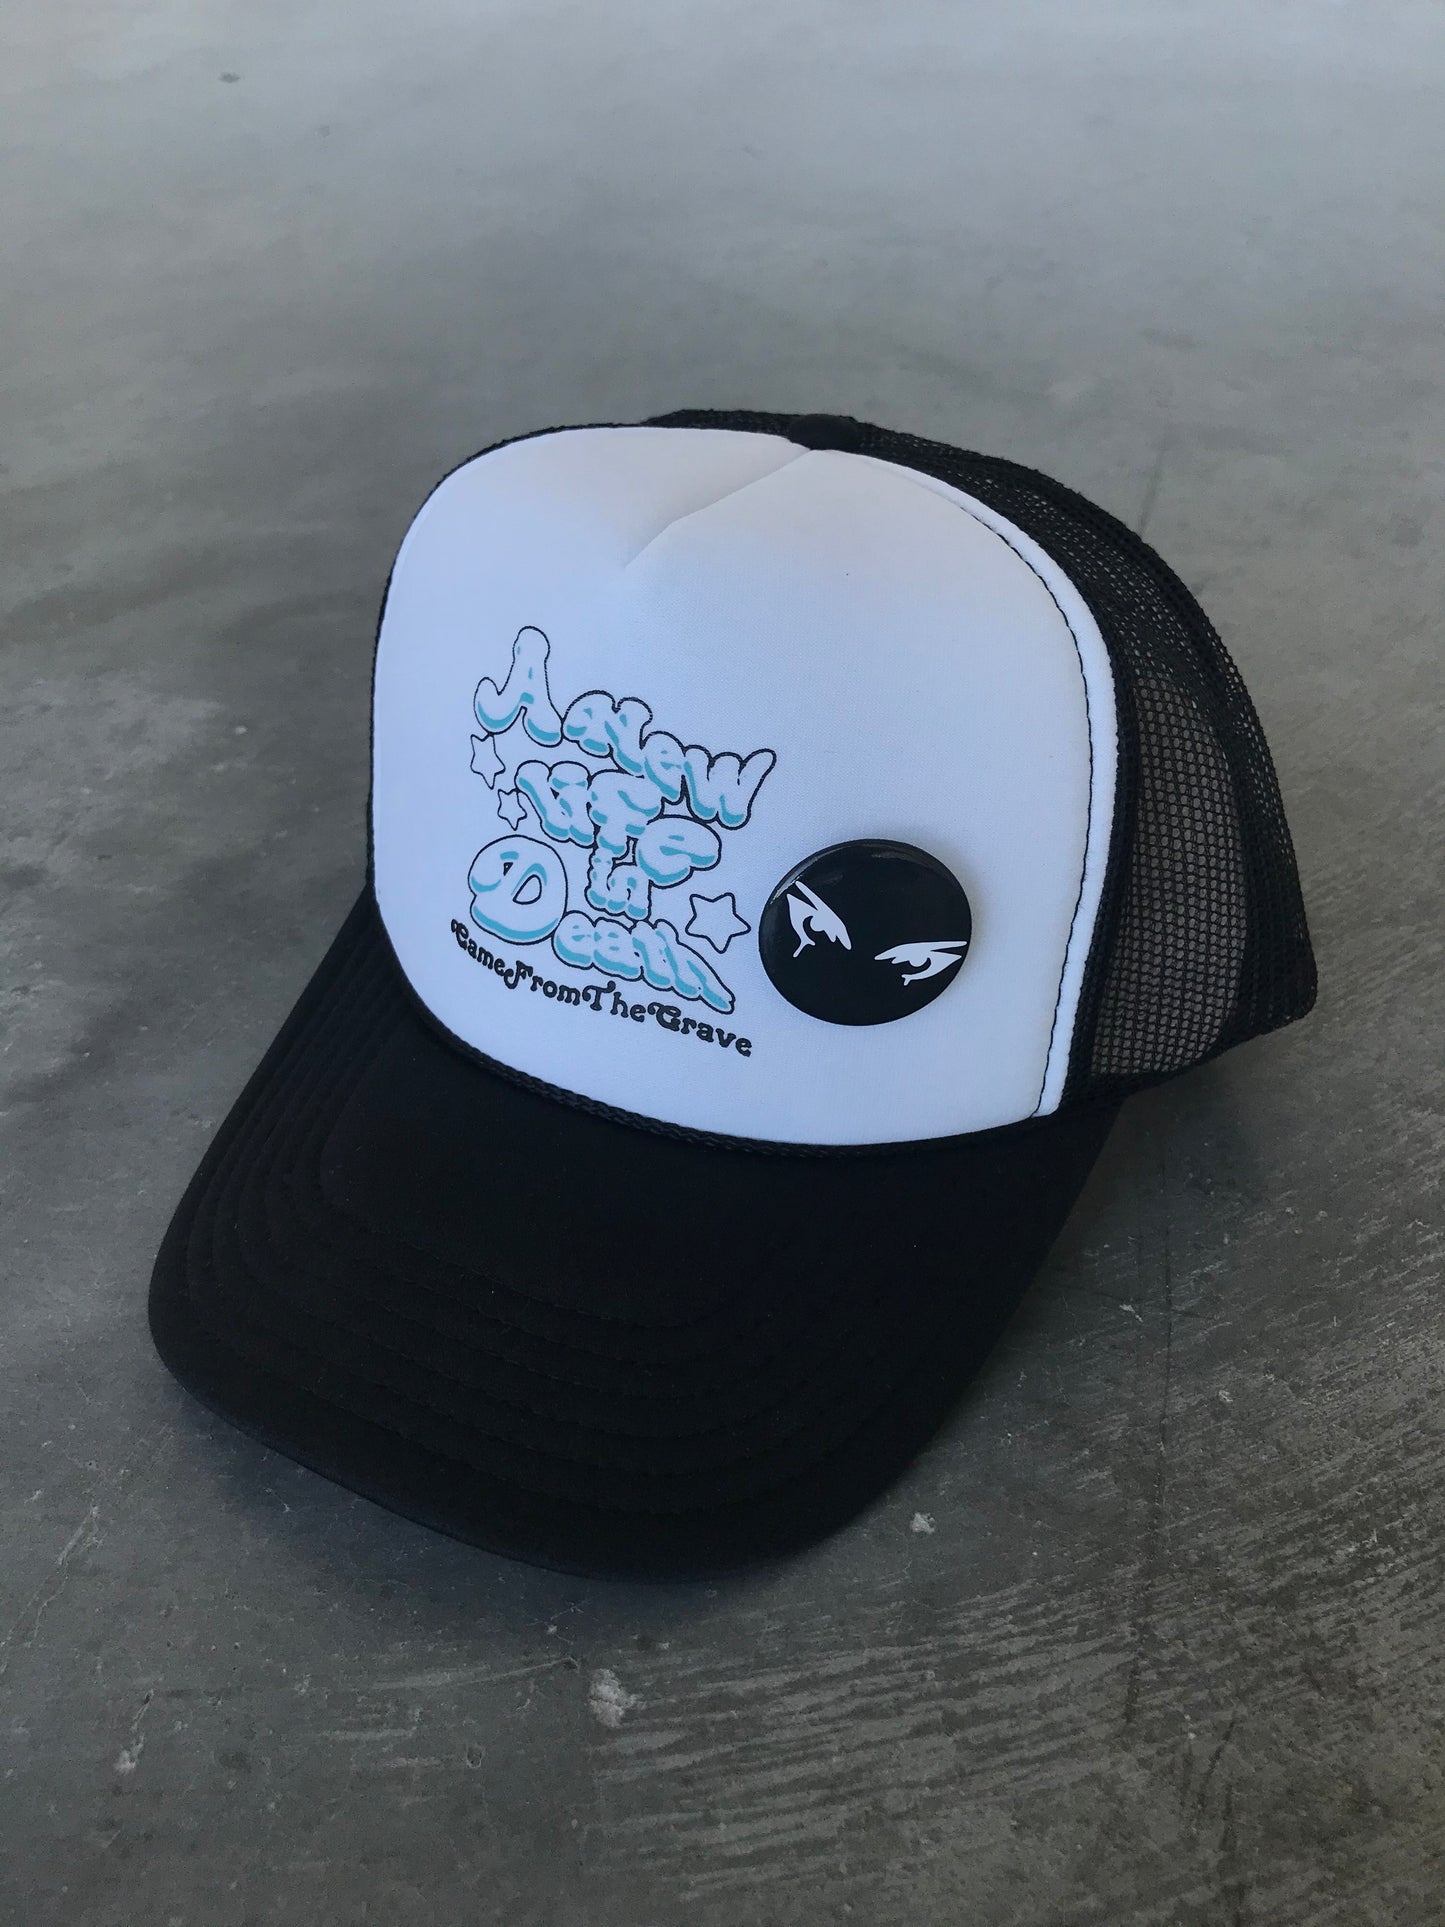 A New Life In Death Trucker Hat